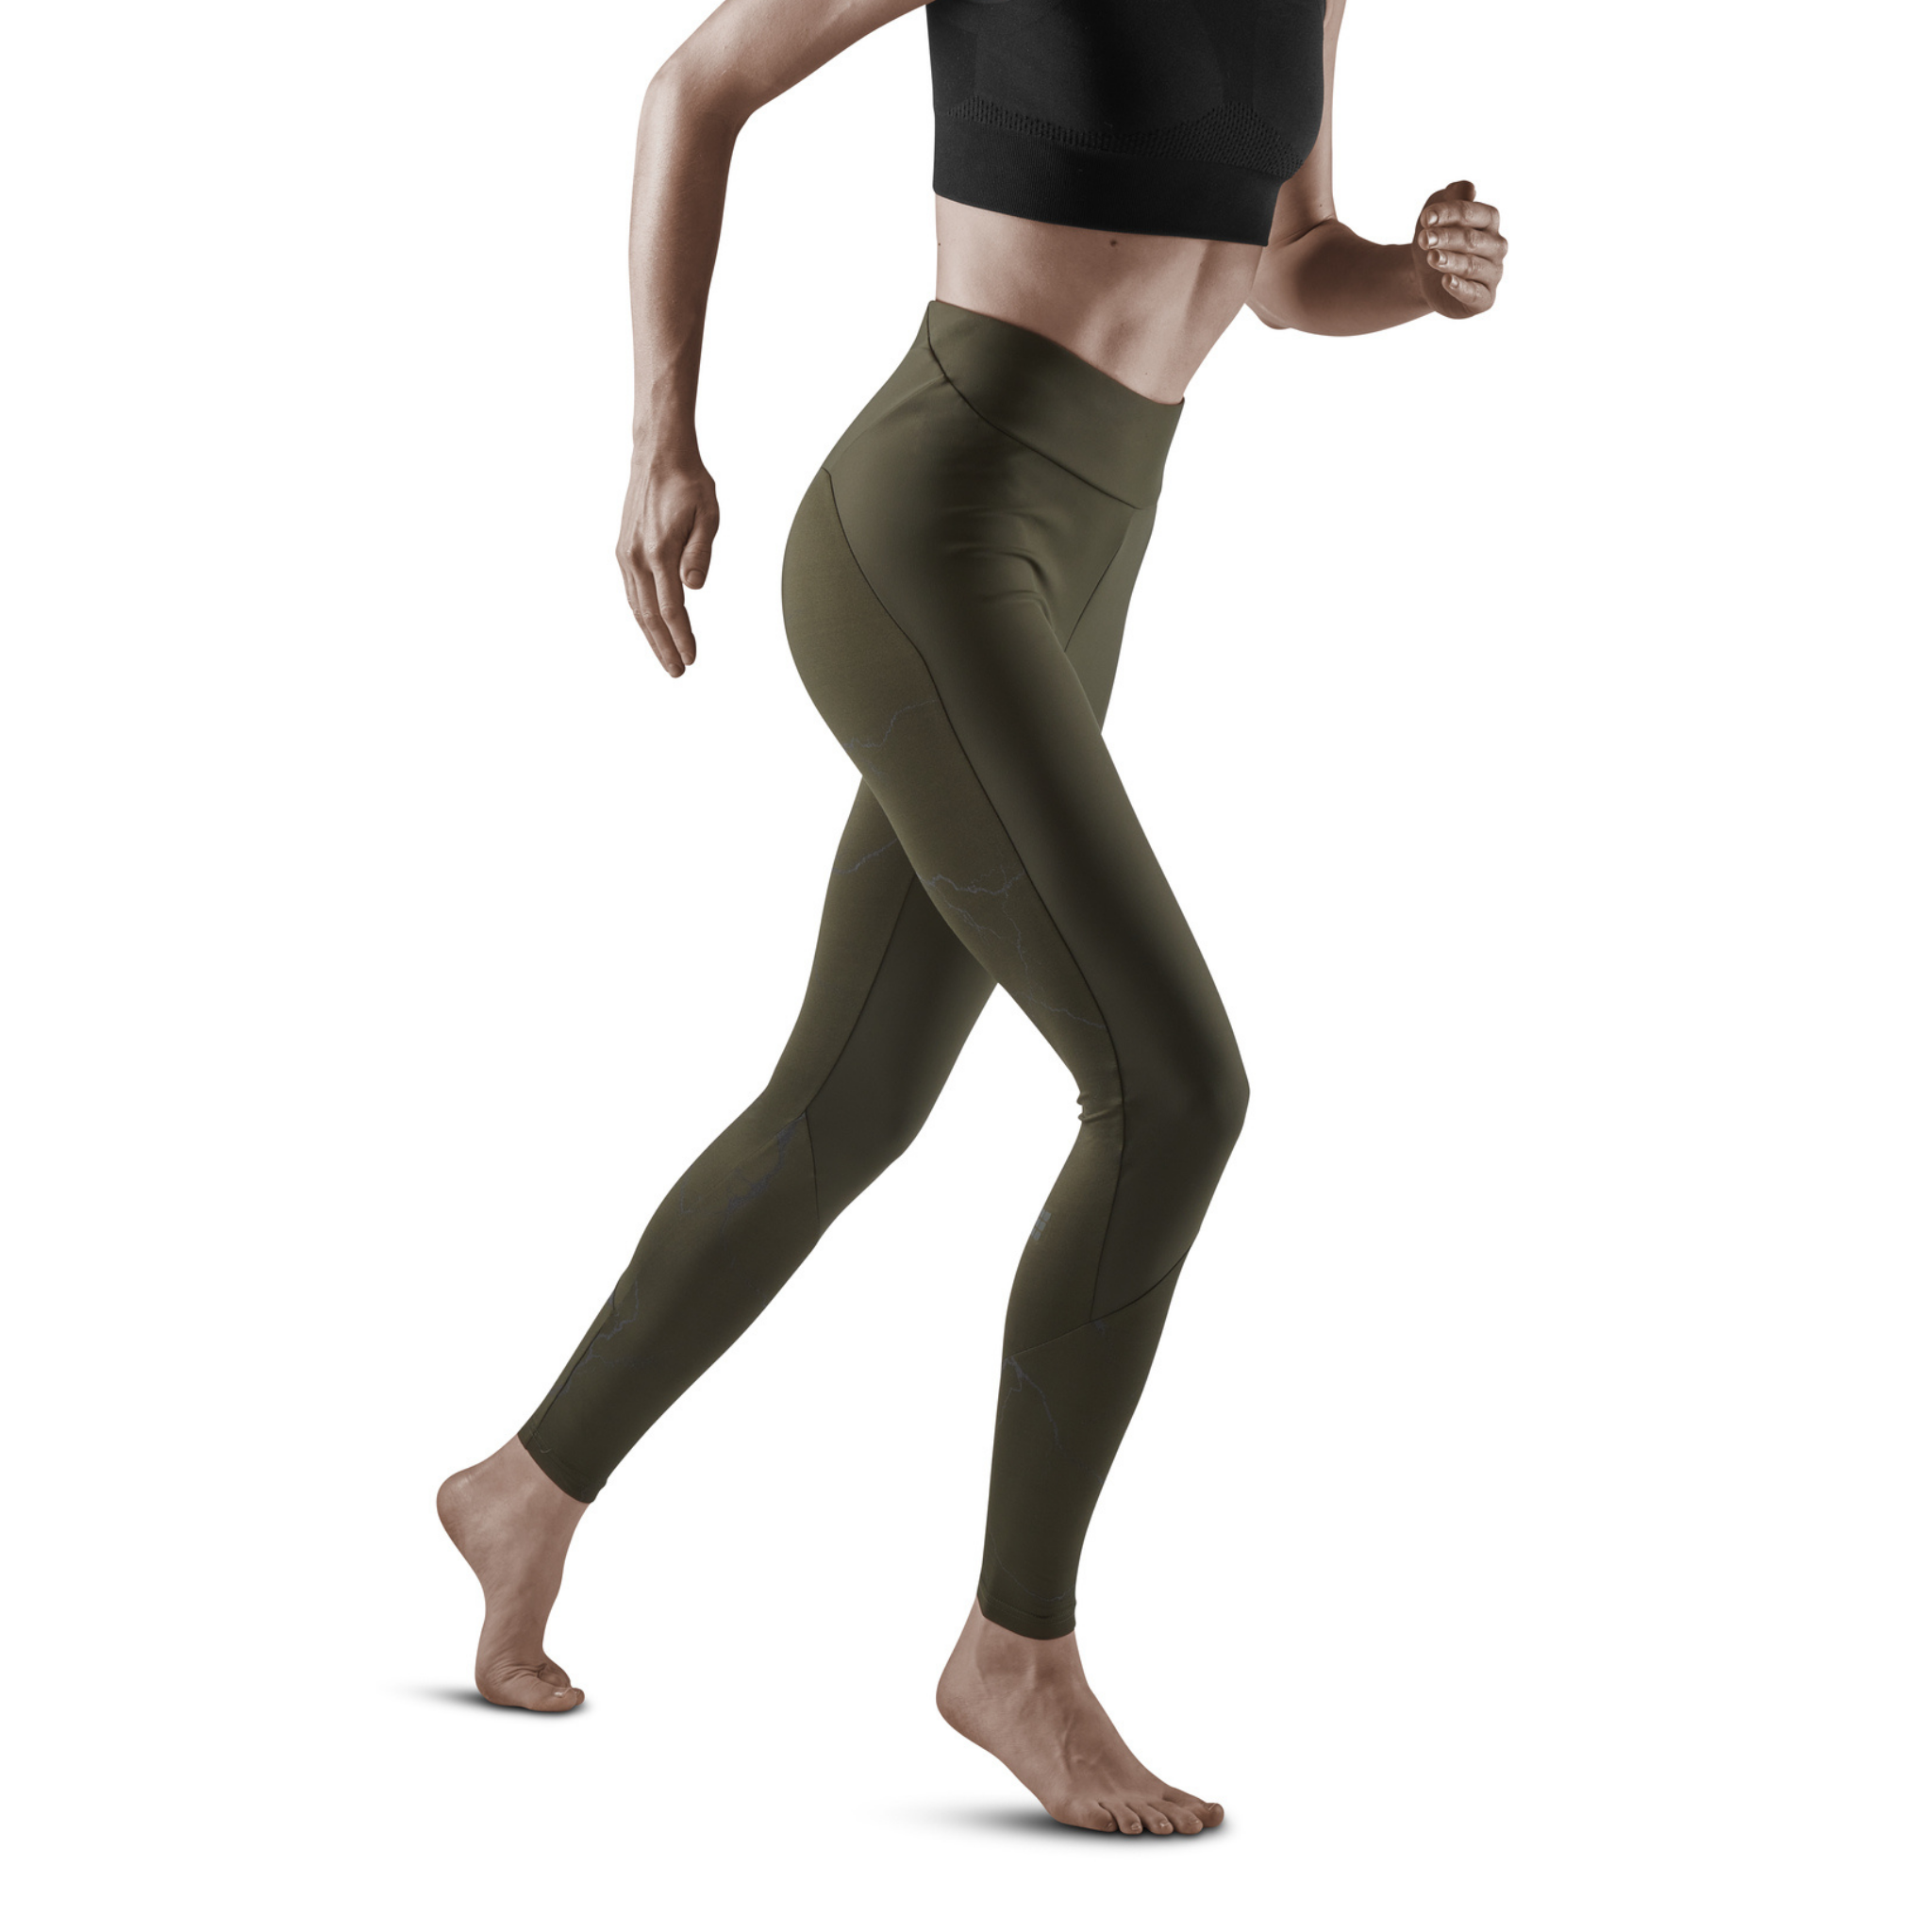 CEP Women's Recovery Pro Compression Tights